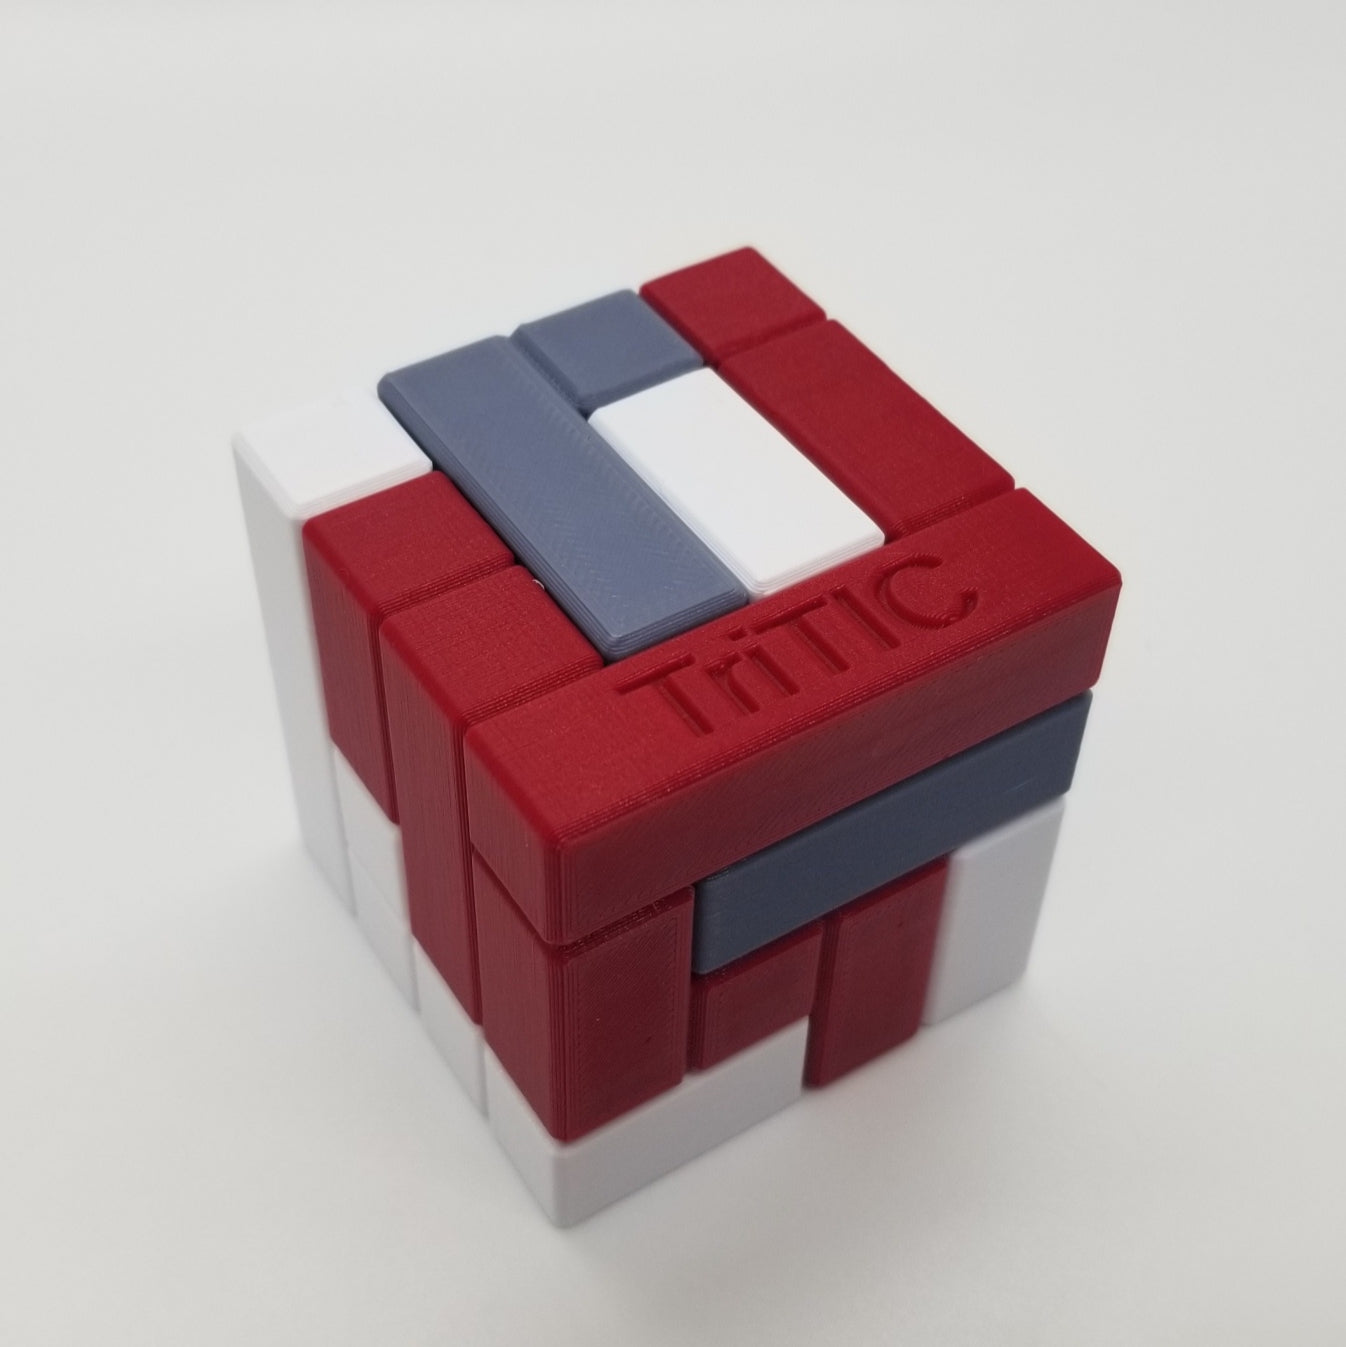 Download 3D Printable STL Files for 8 Three Piece 4x4x4 Turning Interlocking Cube Puzzles